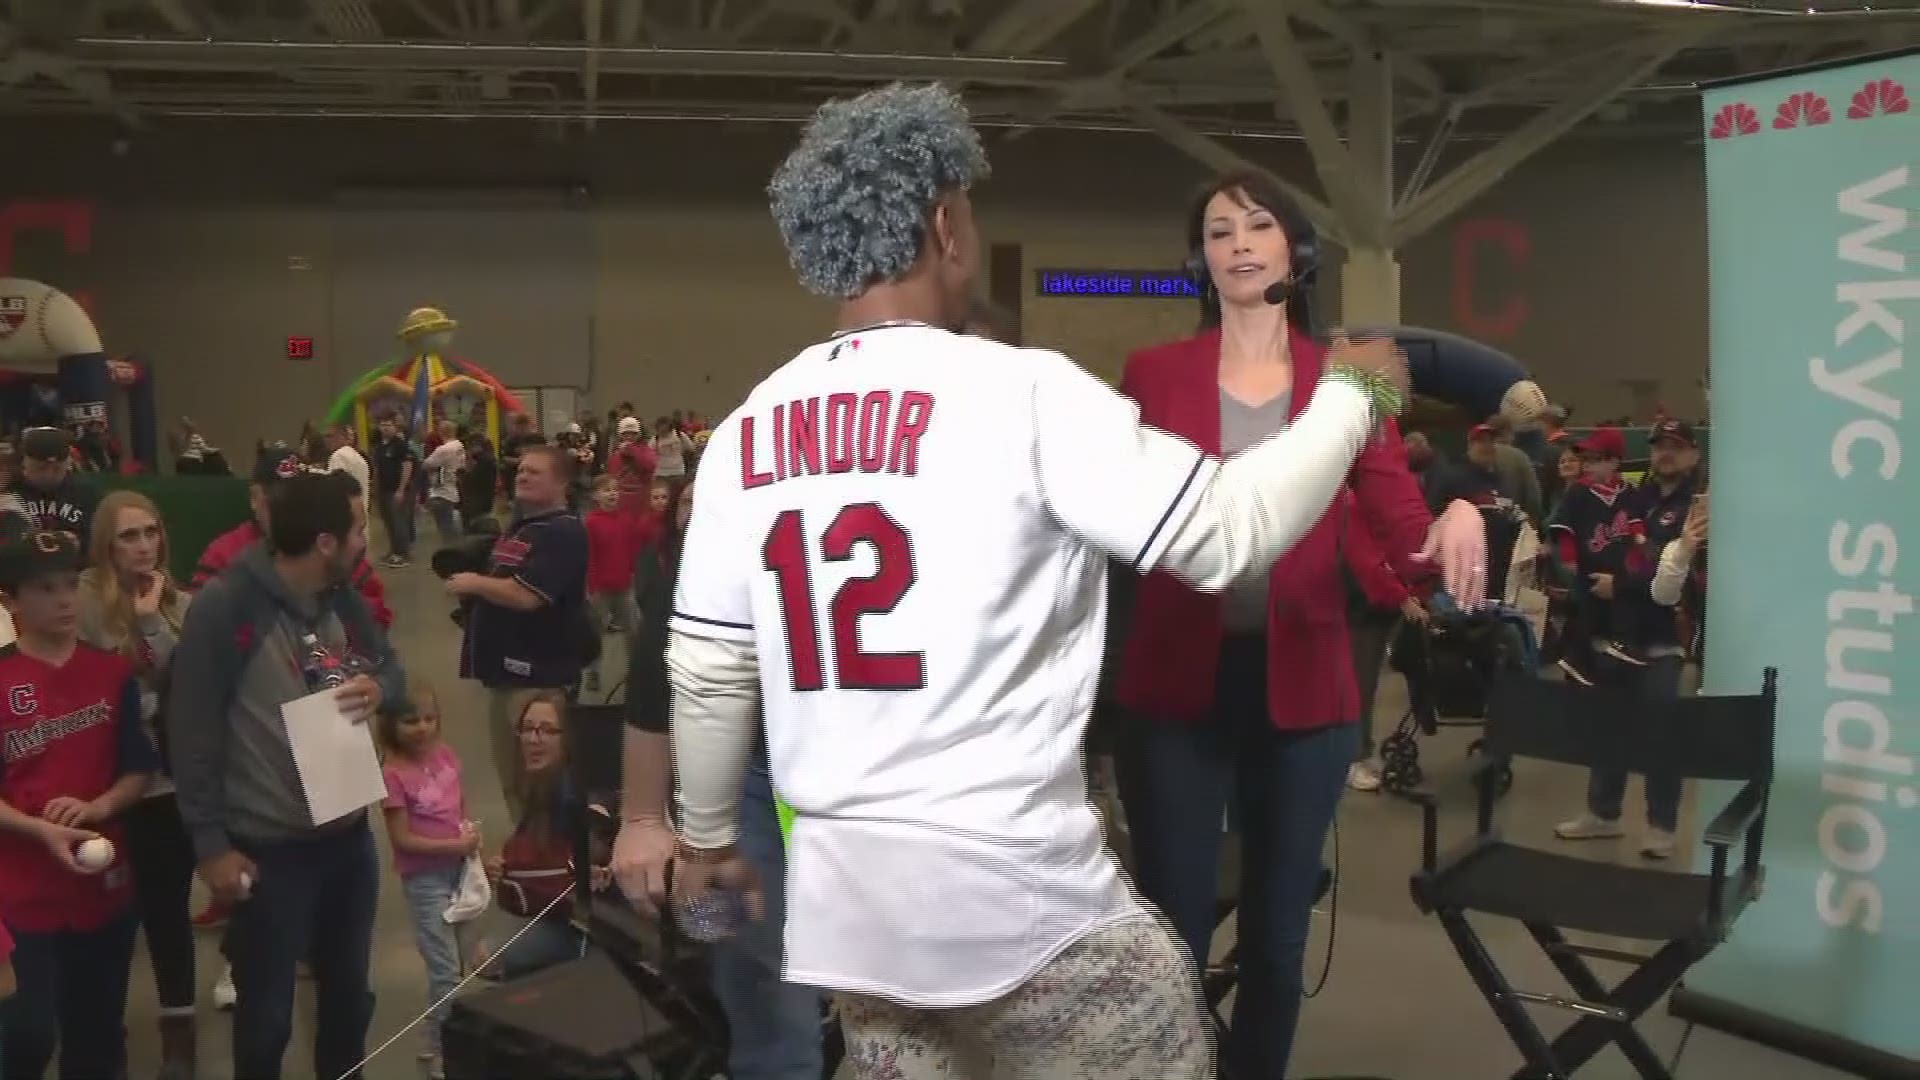 "I want to be the shortstop of the Cleveland Indians," Lindor said. The superstar talked to 3News at the annual Tribe Fest celebration on Saturday.